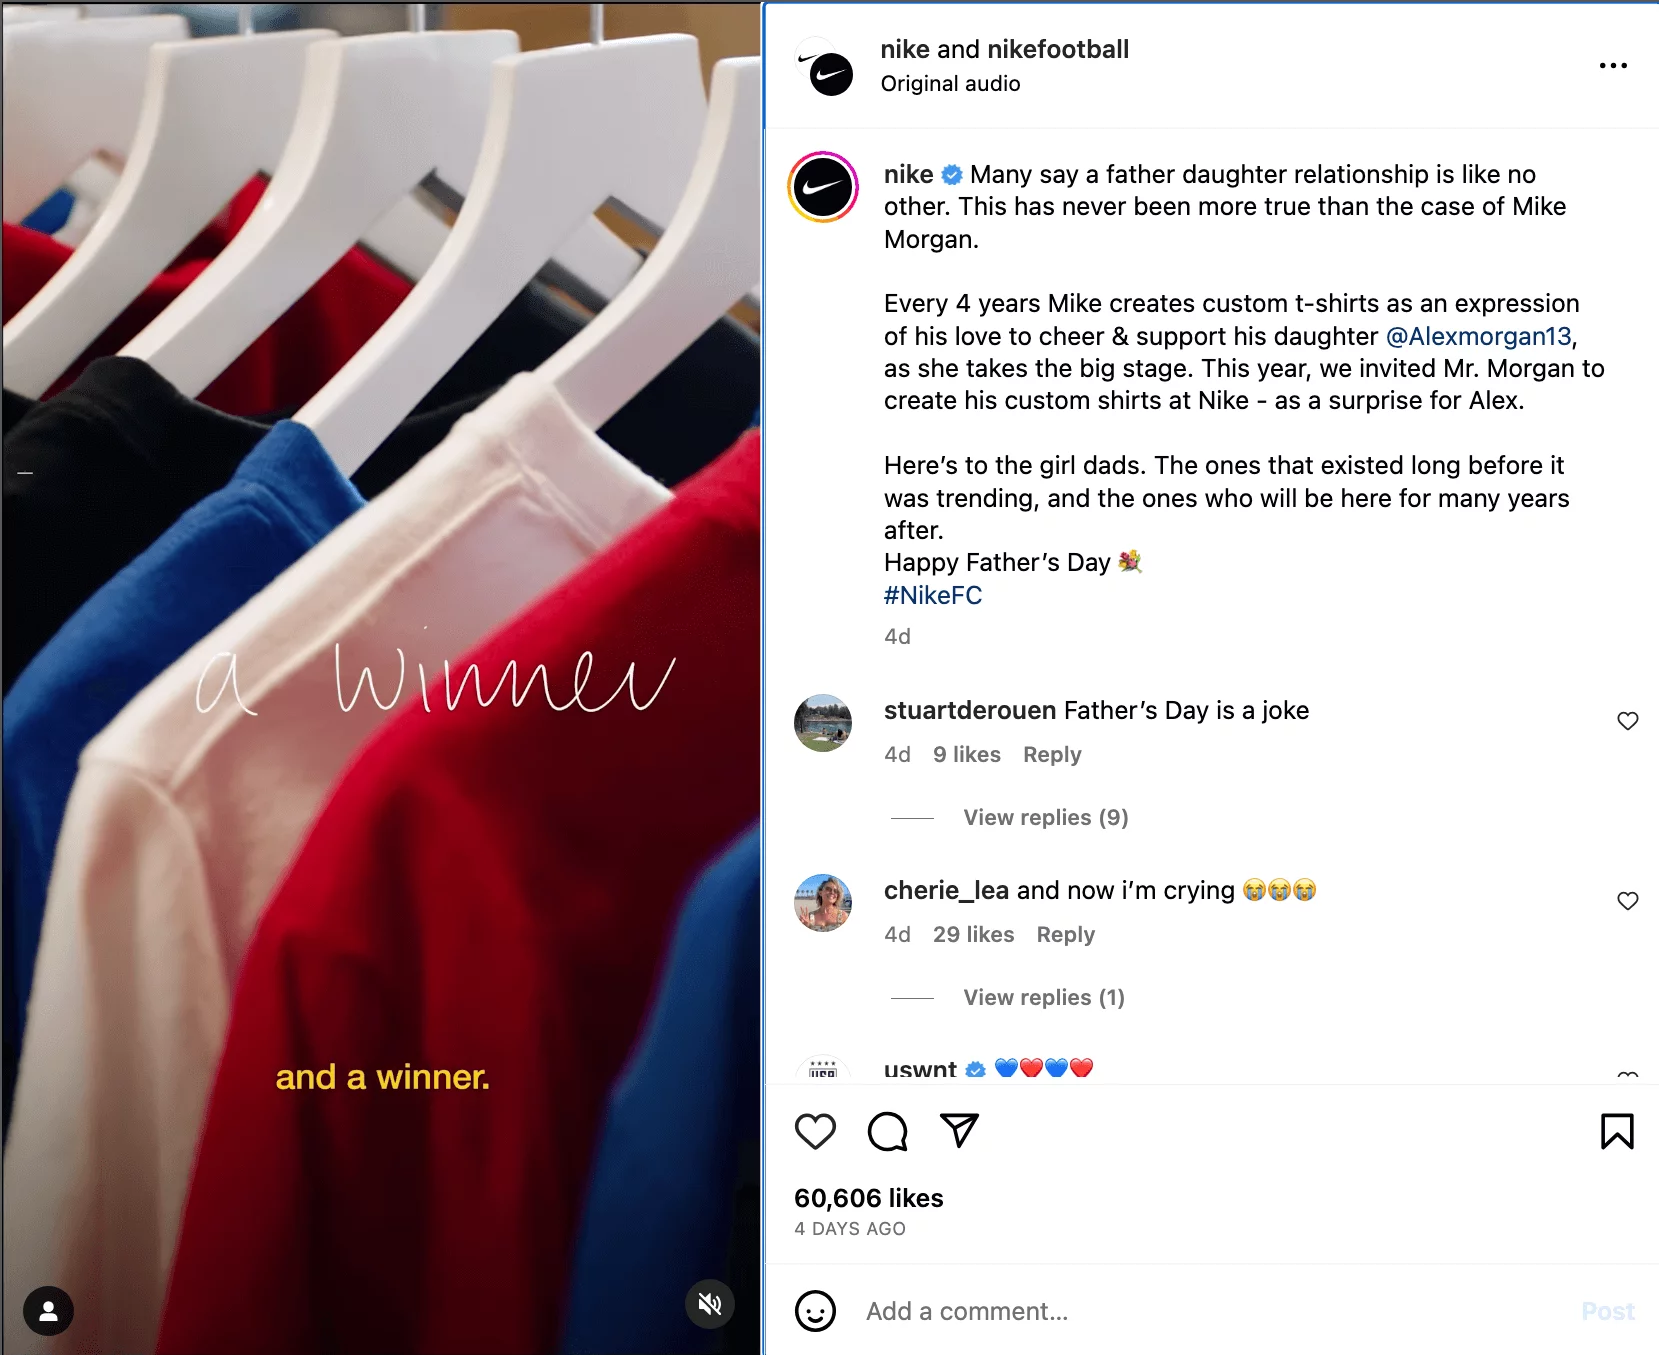 Instagram post showing a rack of coloured shirts, marked as a collaboration between nike and nikefootbal